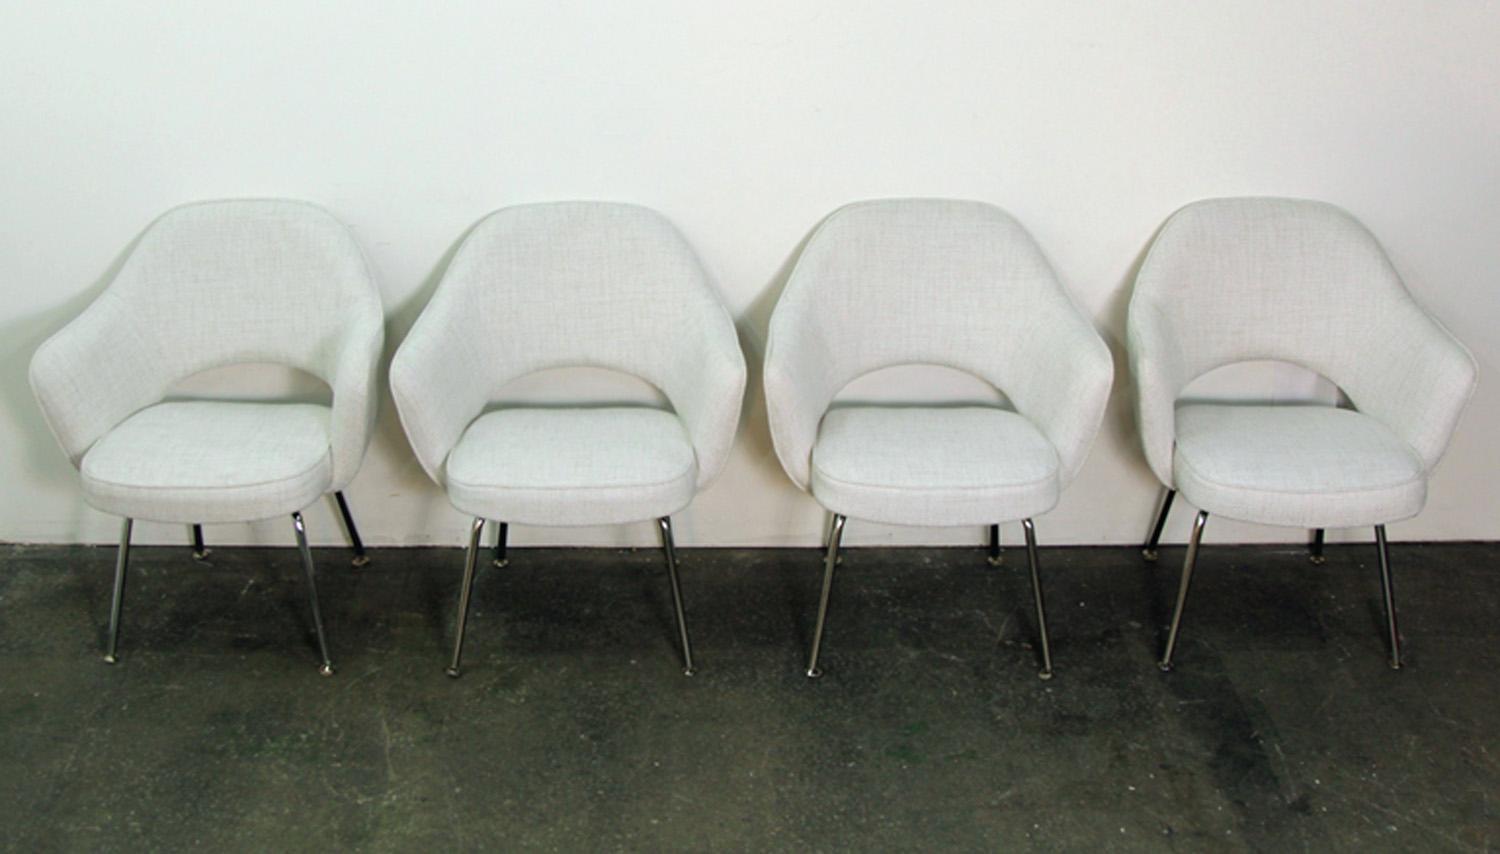 Incredible set of 8 Eero Saarinen midcentury designed executive chairs. Made by Knoll, this original set has been newly upholstered in white woven fabric. Chrome legs in excellent condition.